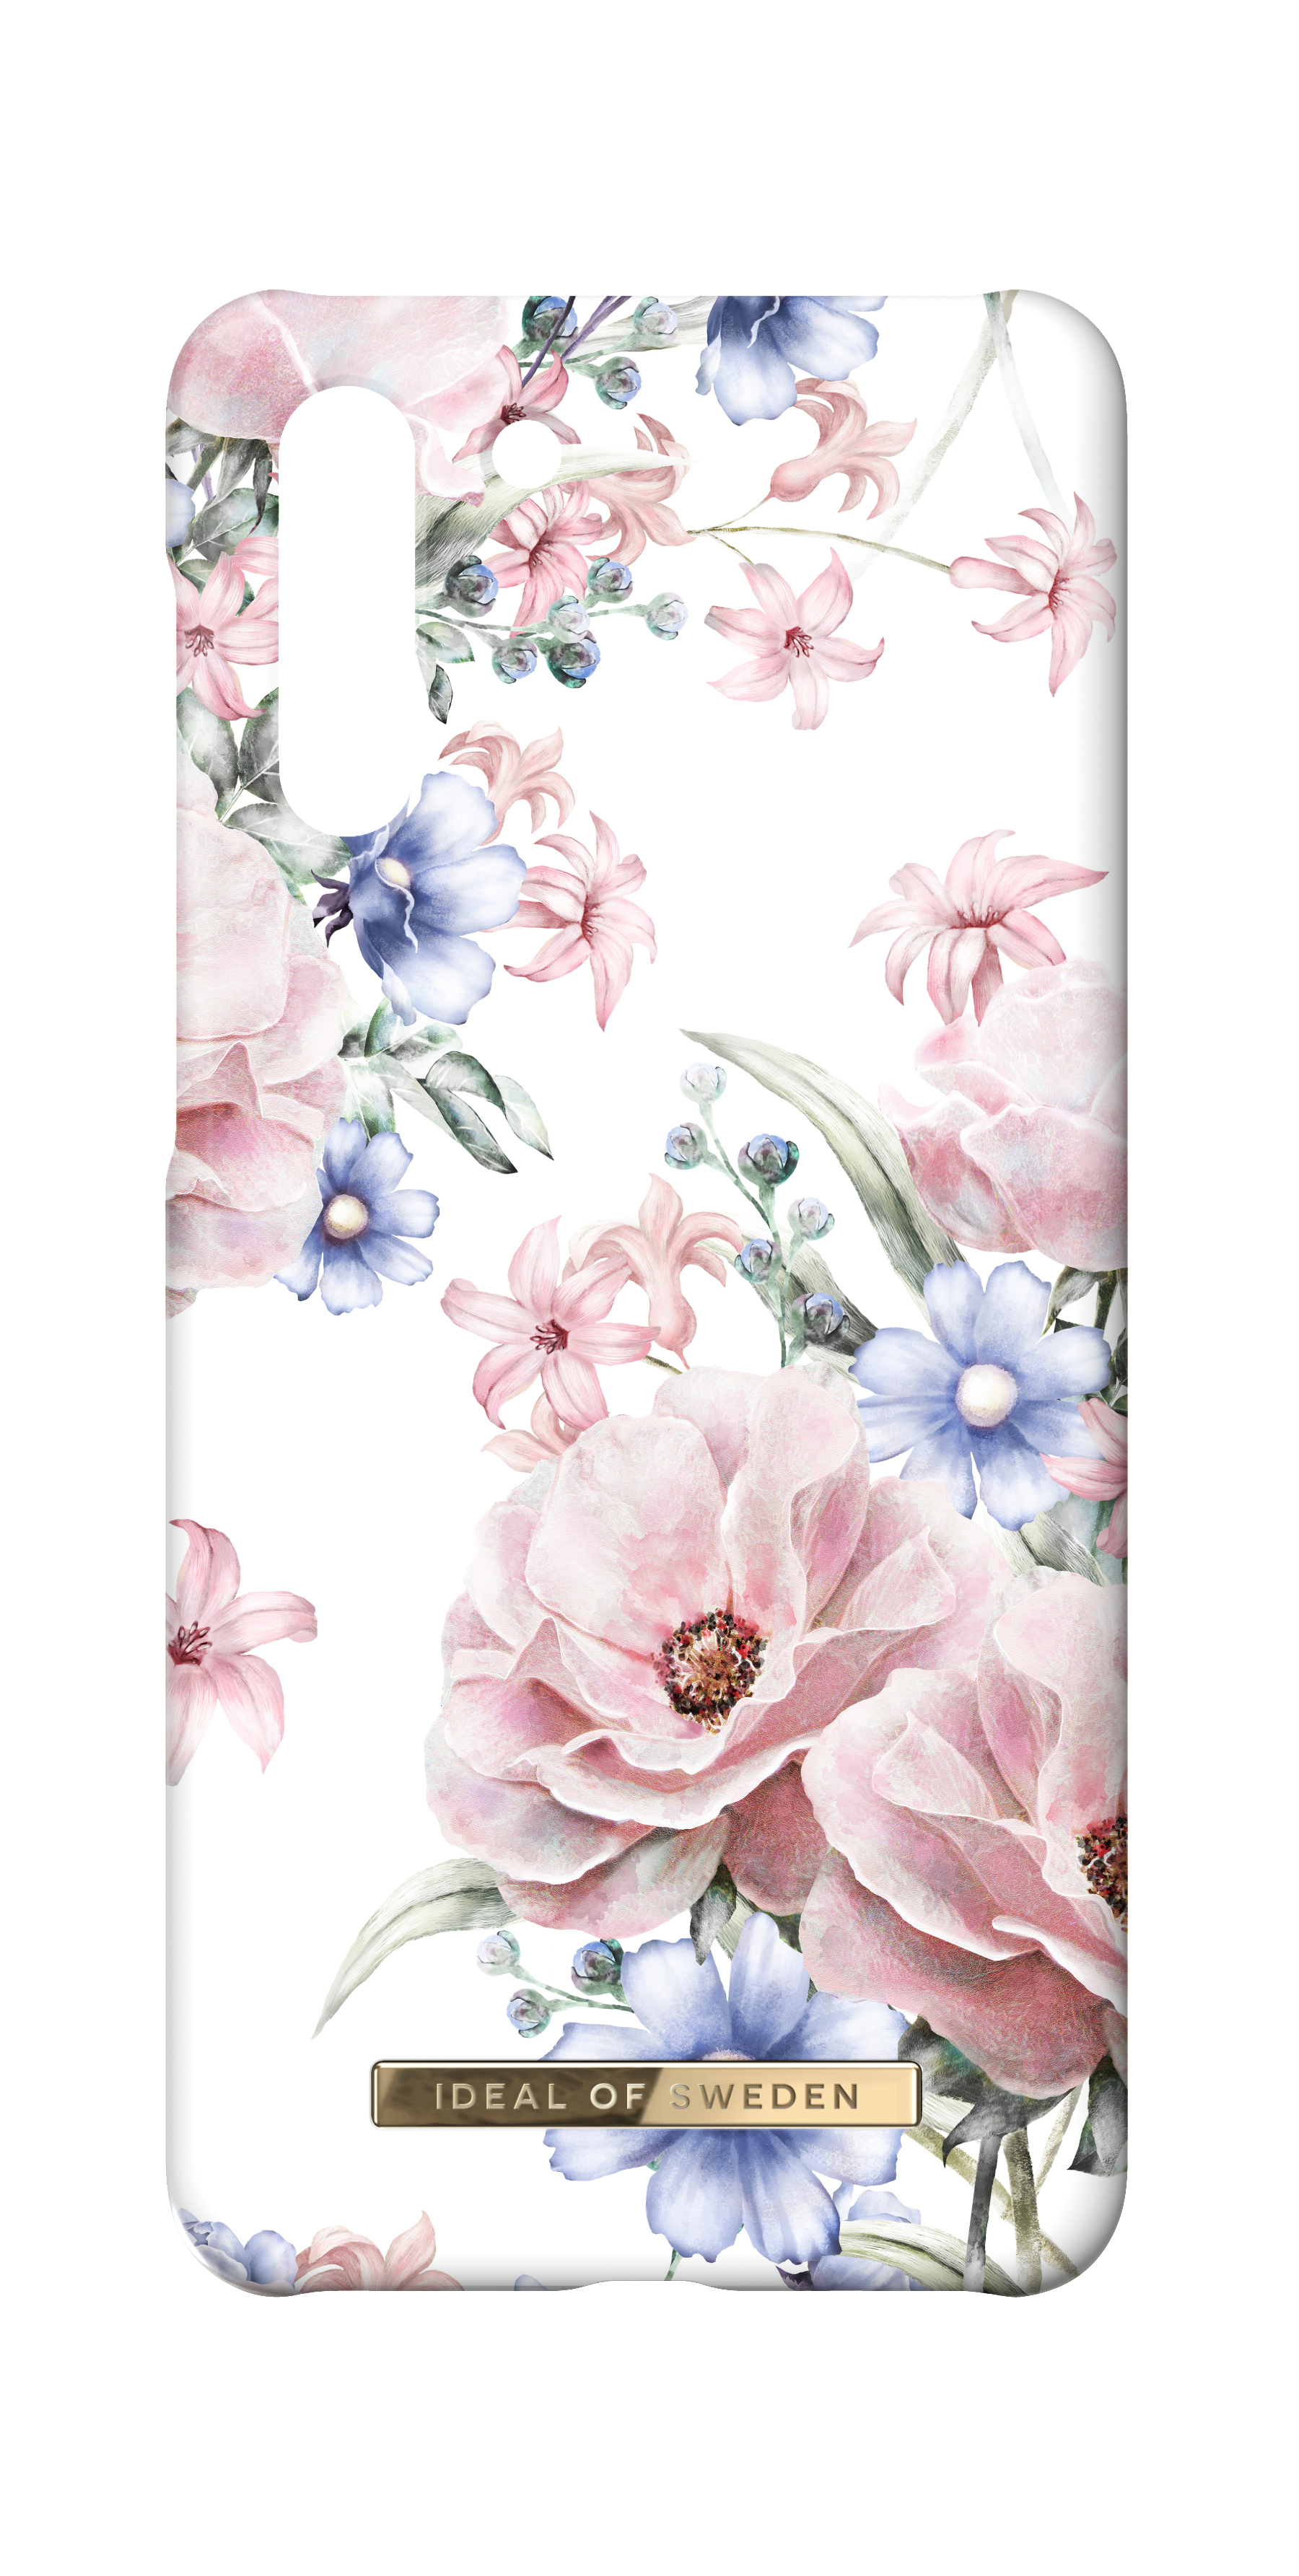 IDEAL OF SWEDEN Plus, S21 Backcover, Weiß/Rosa Case, Fashion Samsung, Galaxy